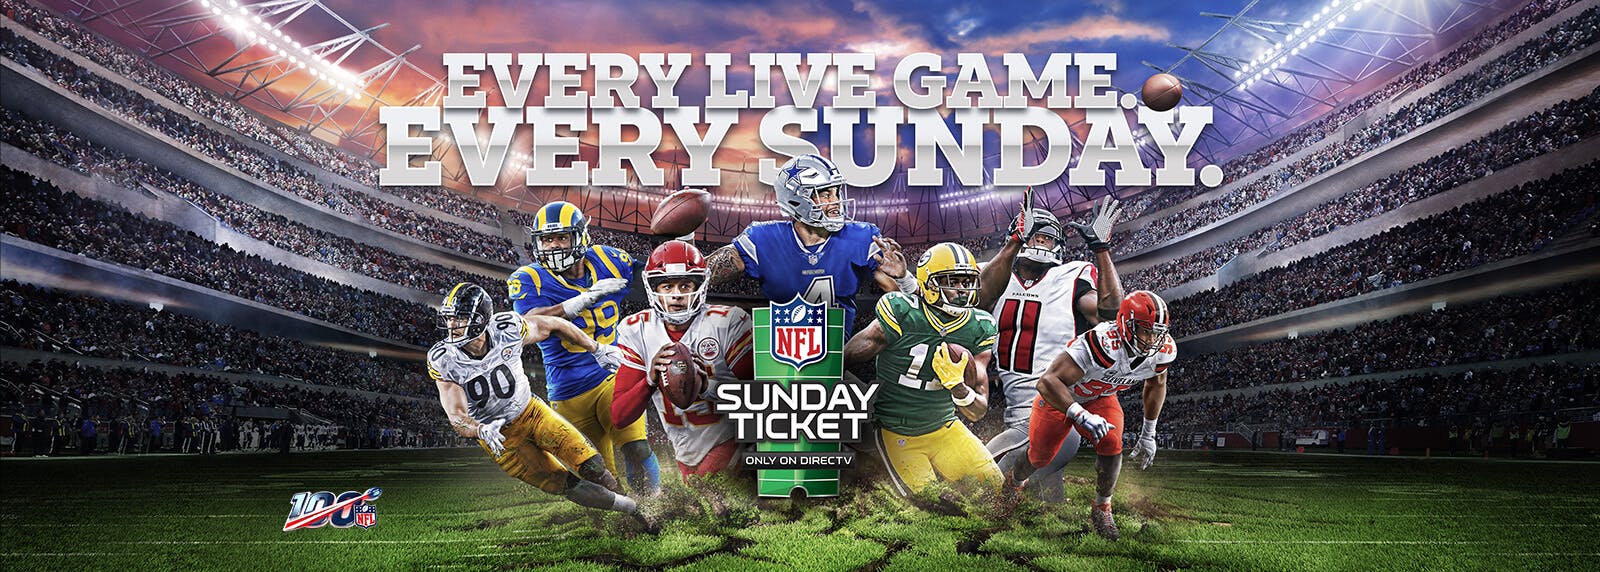 radiers colts nfl sunday ticket afc nfl